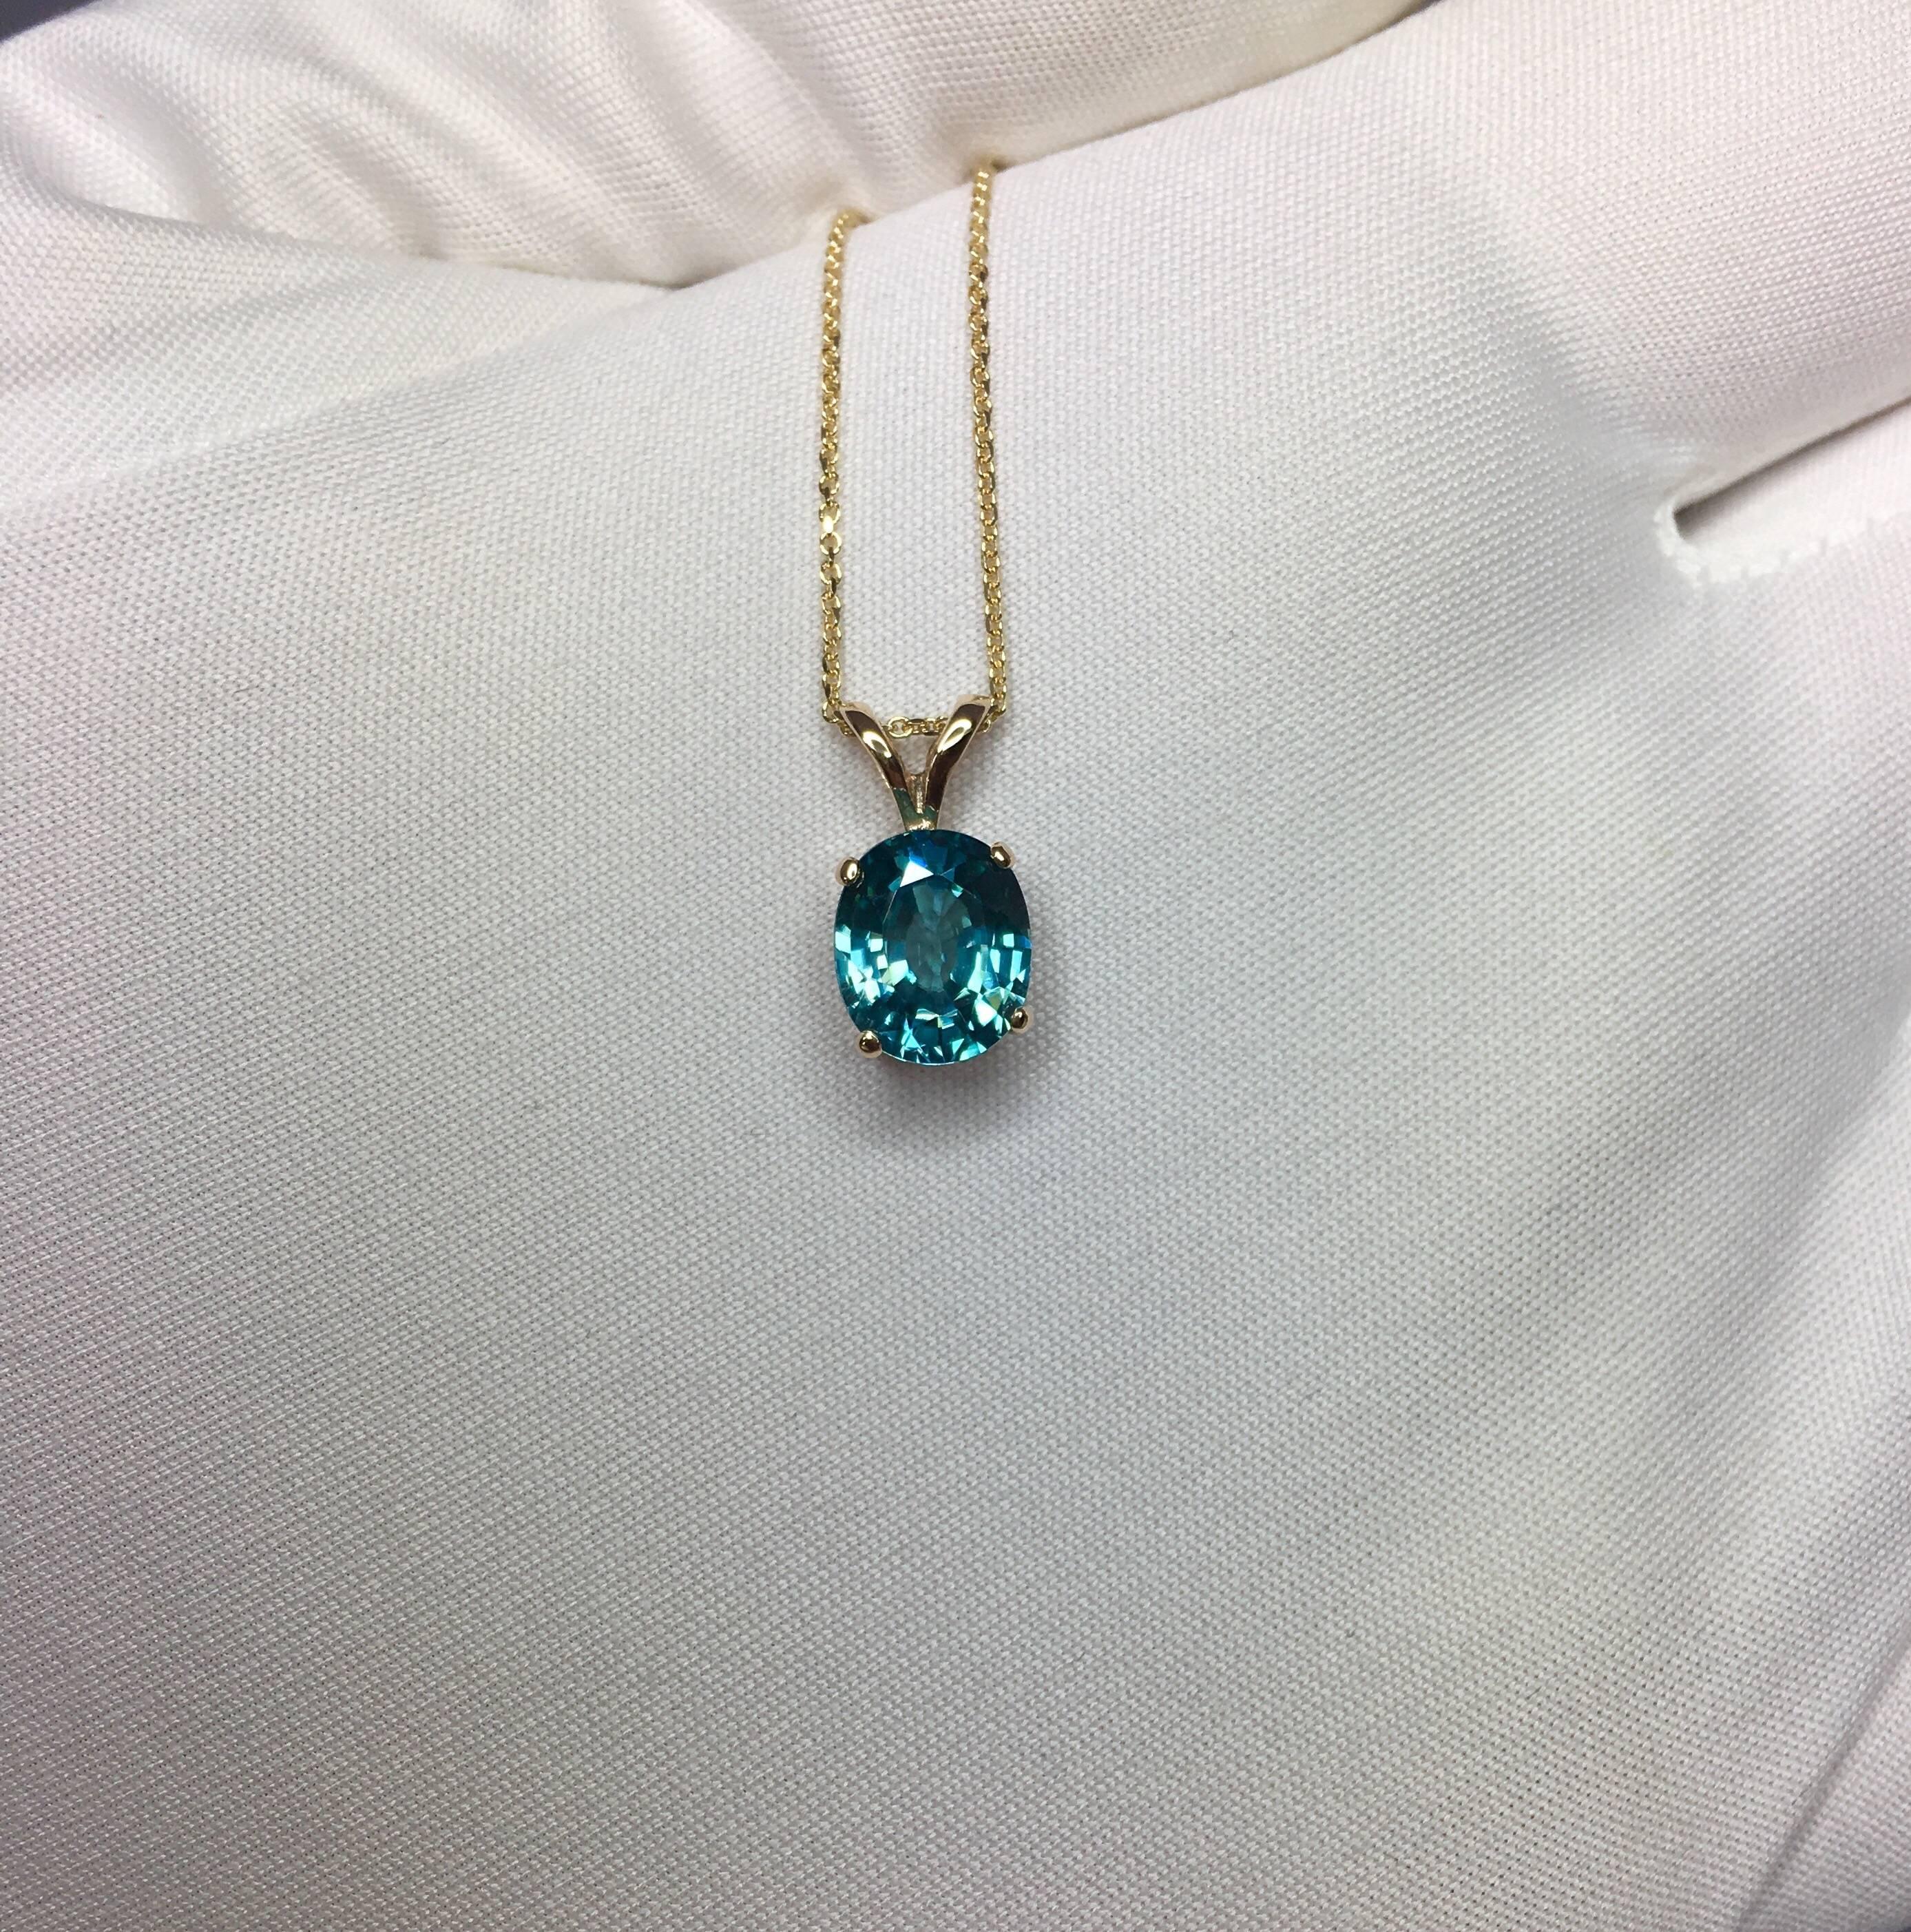 Beautiful natural 2.50 carat blue zircon.
Set in a fine 14k yellow gold solitaire pendant.

Stunning blue zircon with a vivid neon blue colour and excellent clarity, practically flawless.

It also has an excellent oval cut which shows lots of